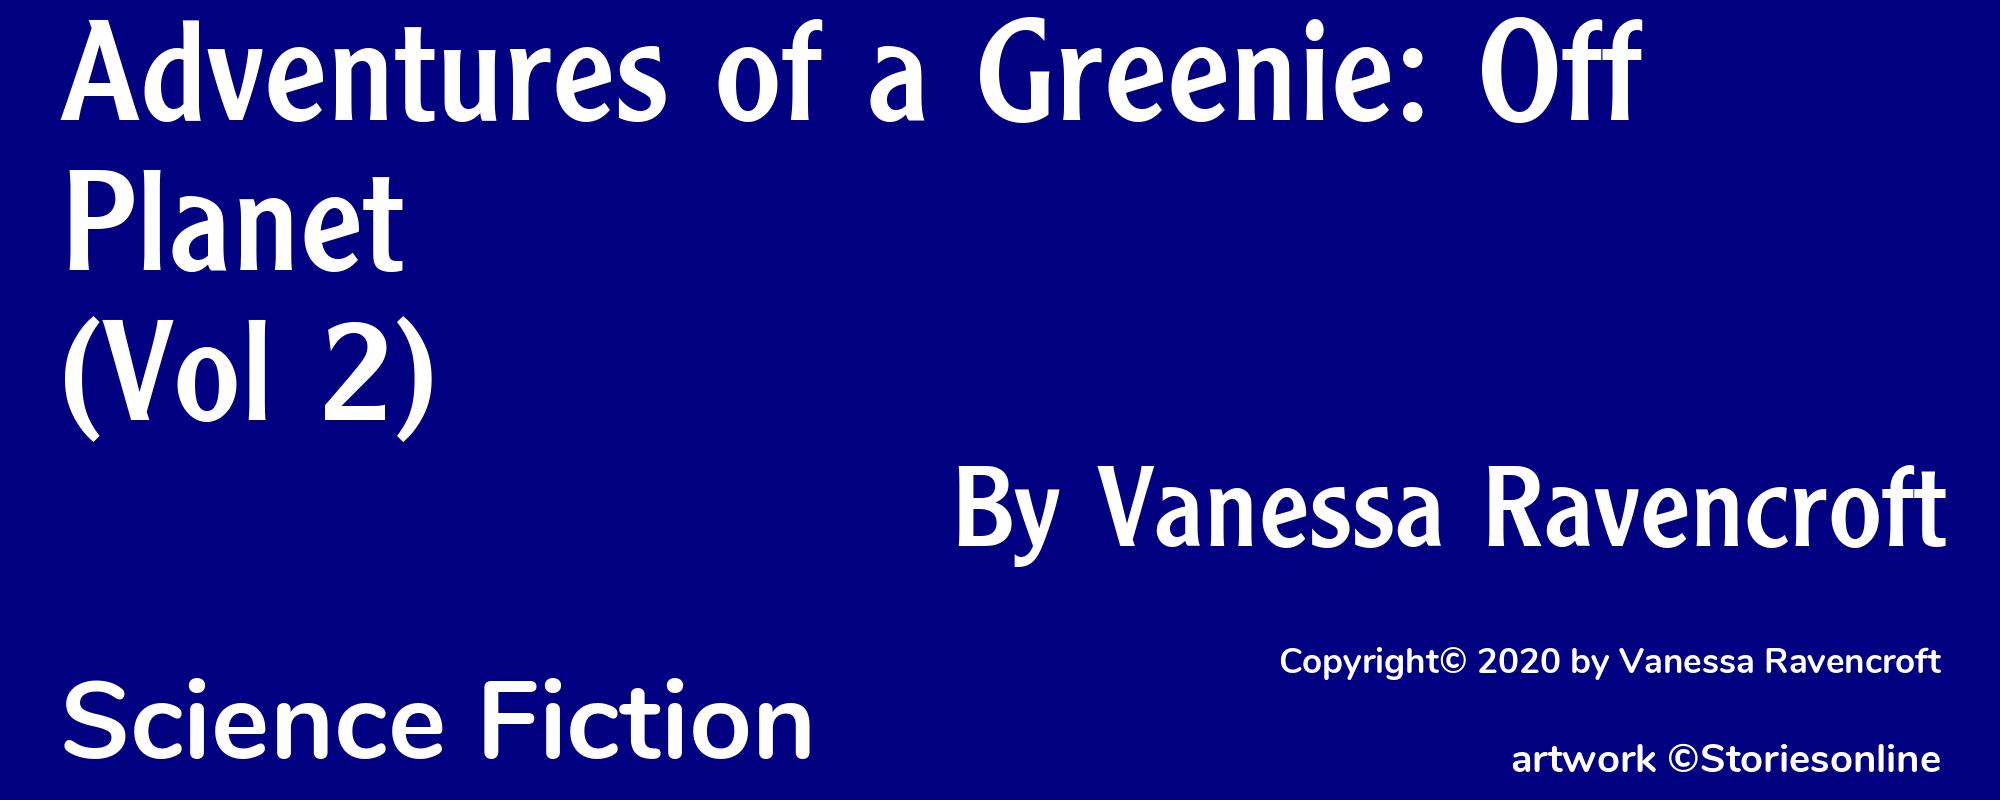 Adventures of a Greenie: Off Planet (Vol 2) - Cover